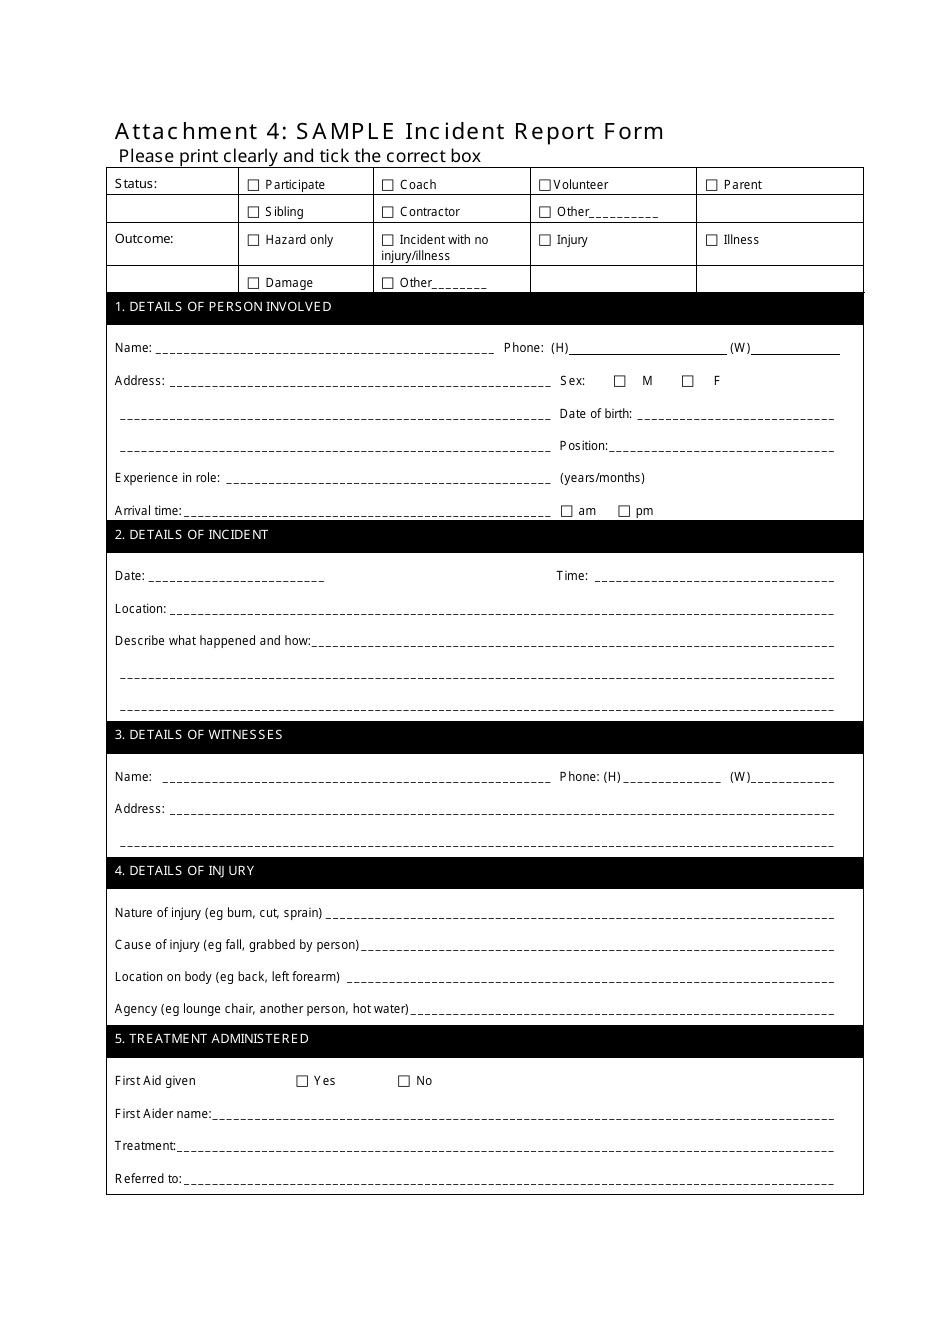 Incident Report Form, Page 1